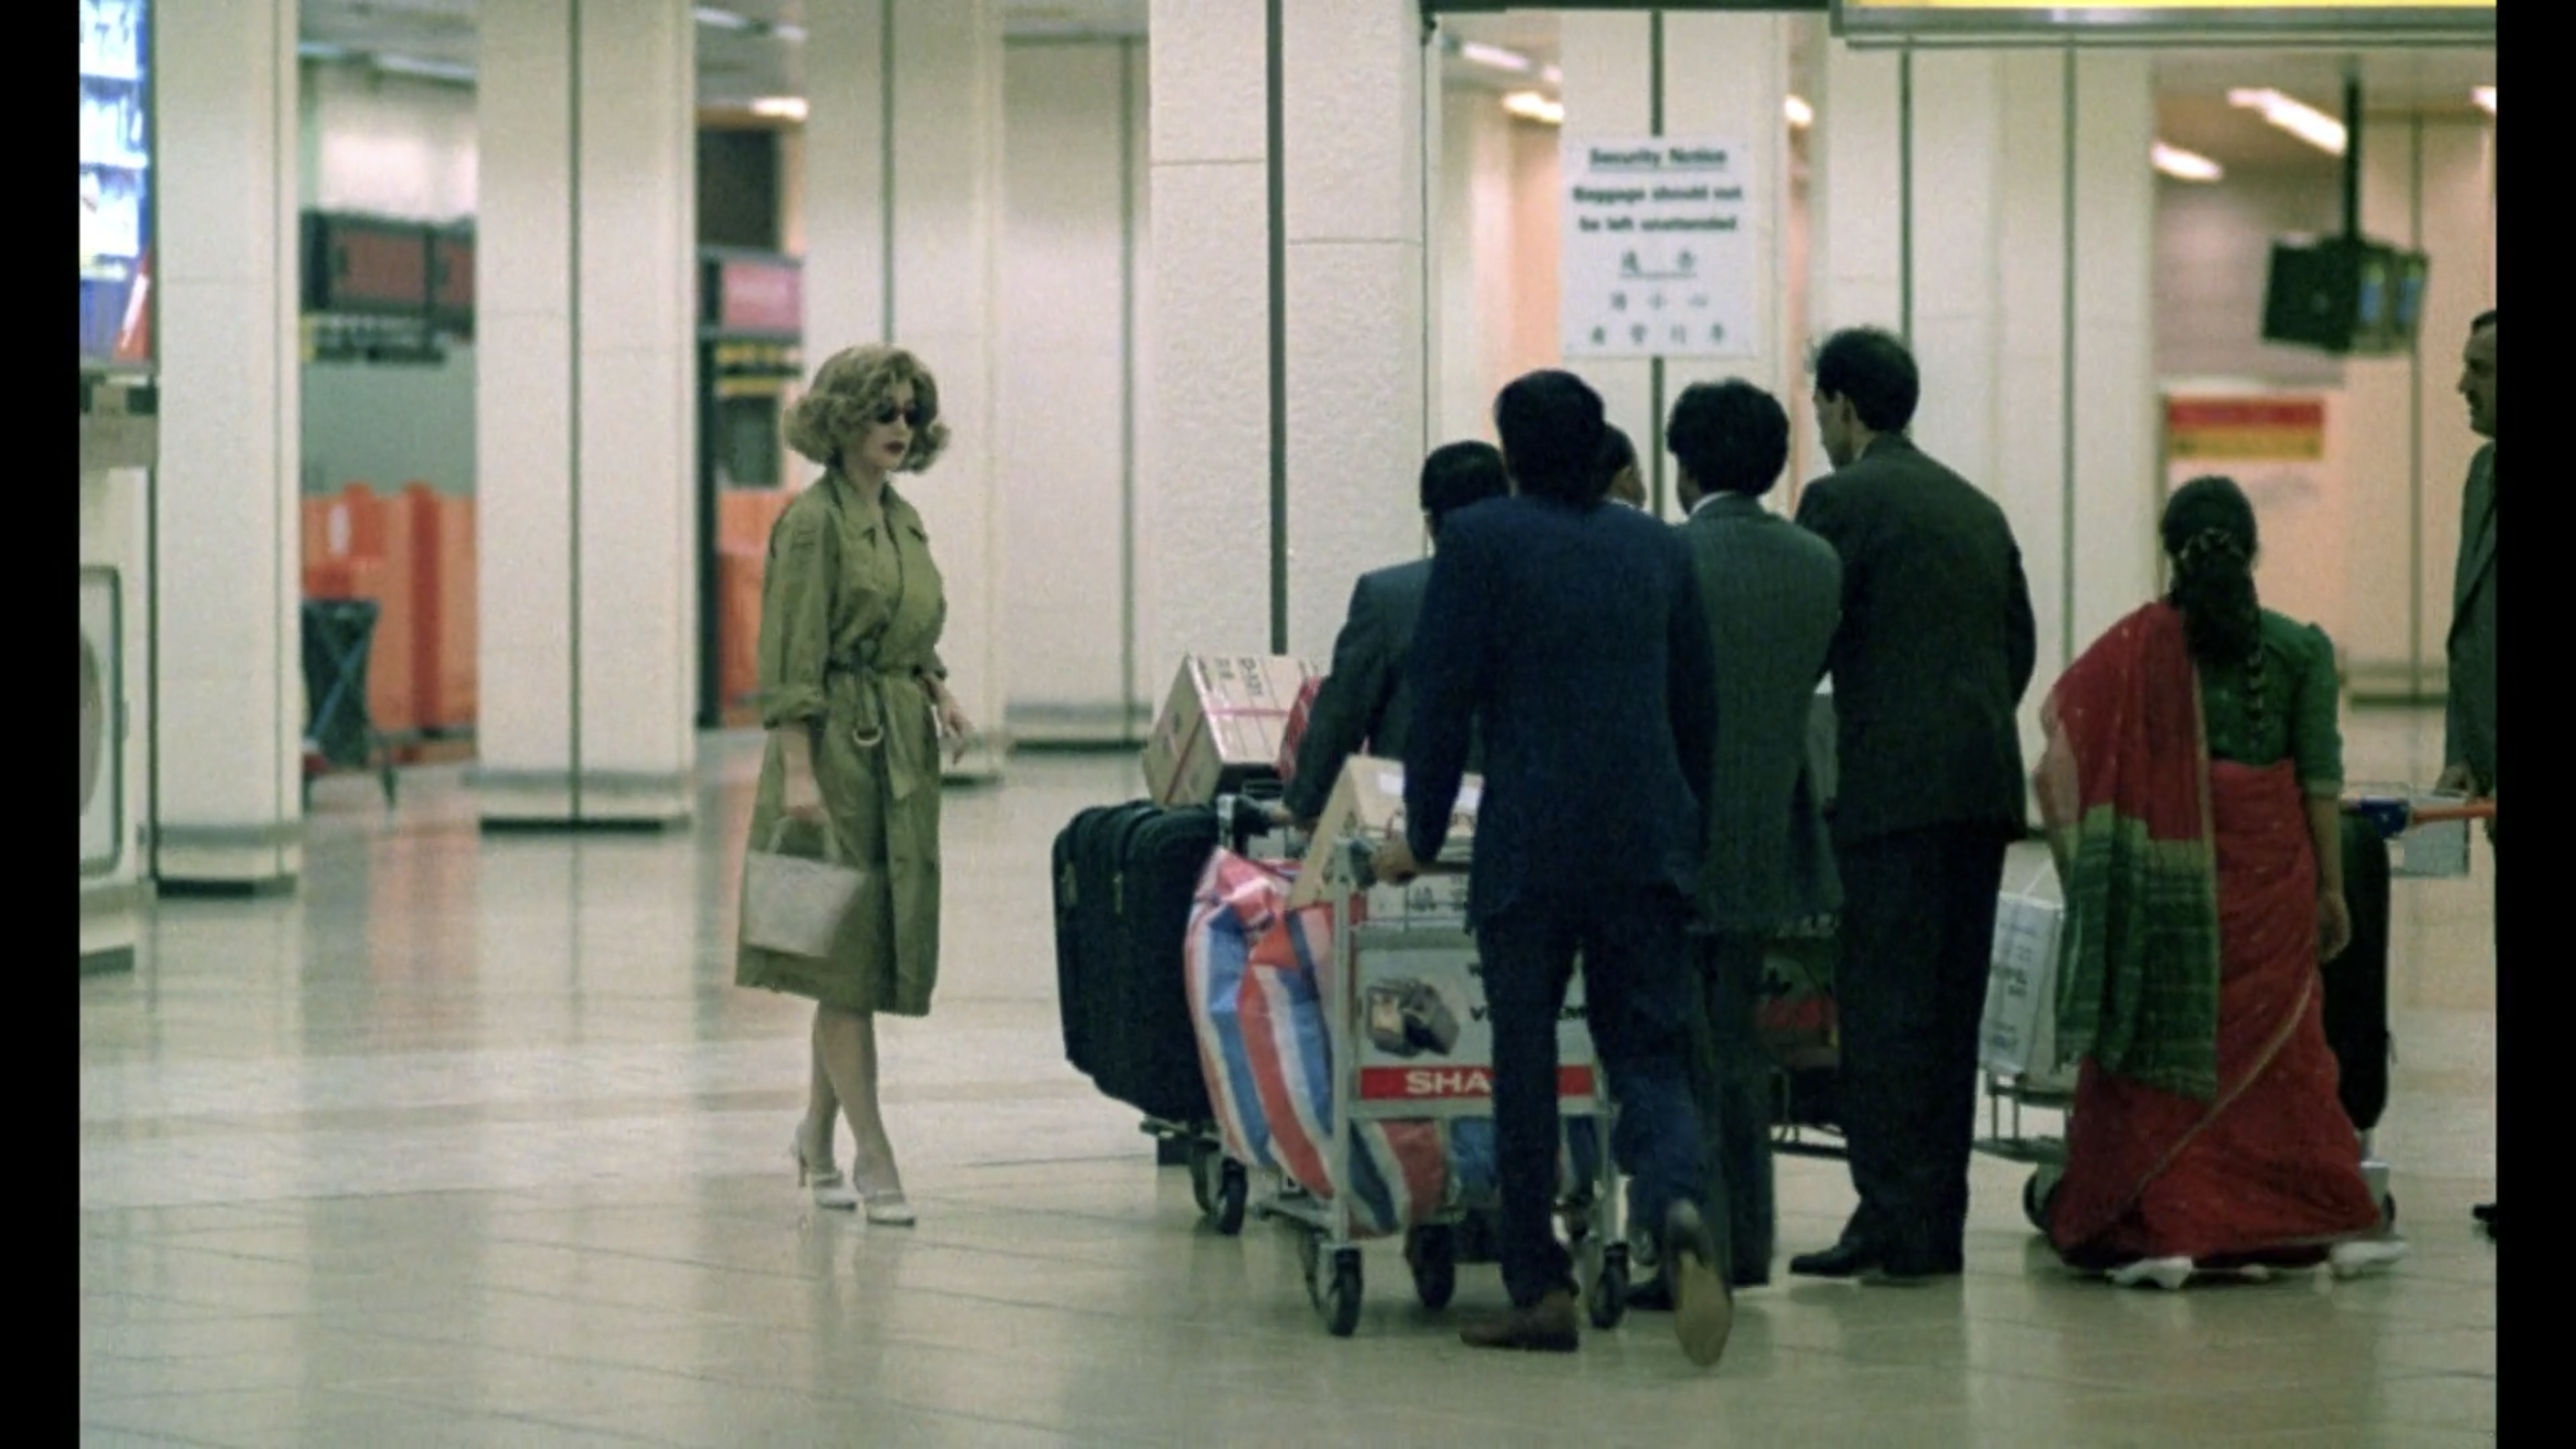 The woman in the blonde wig transports drugs at the airport in Chungking Express